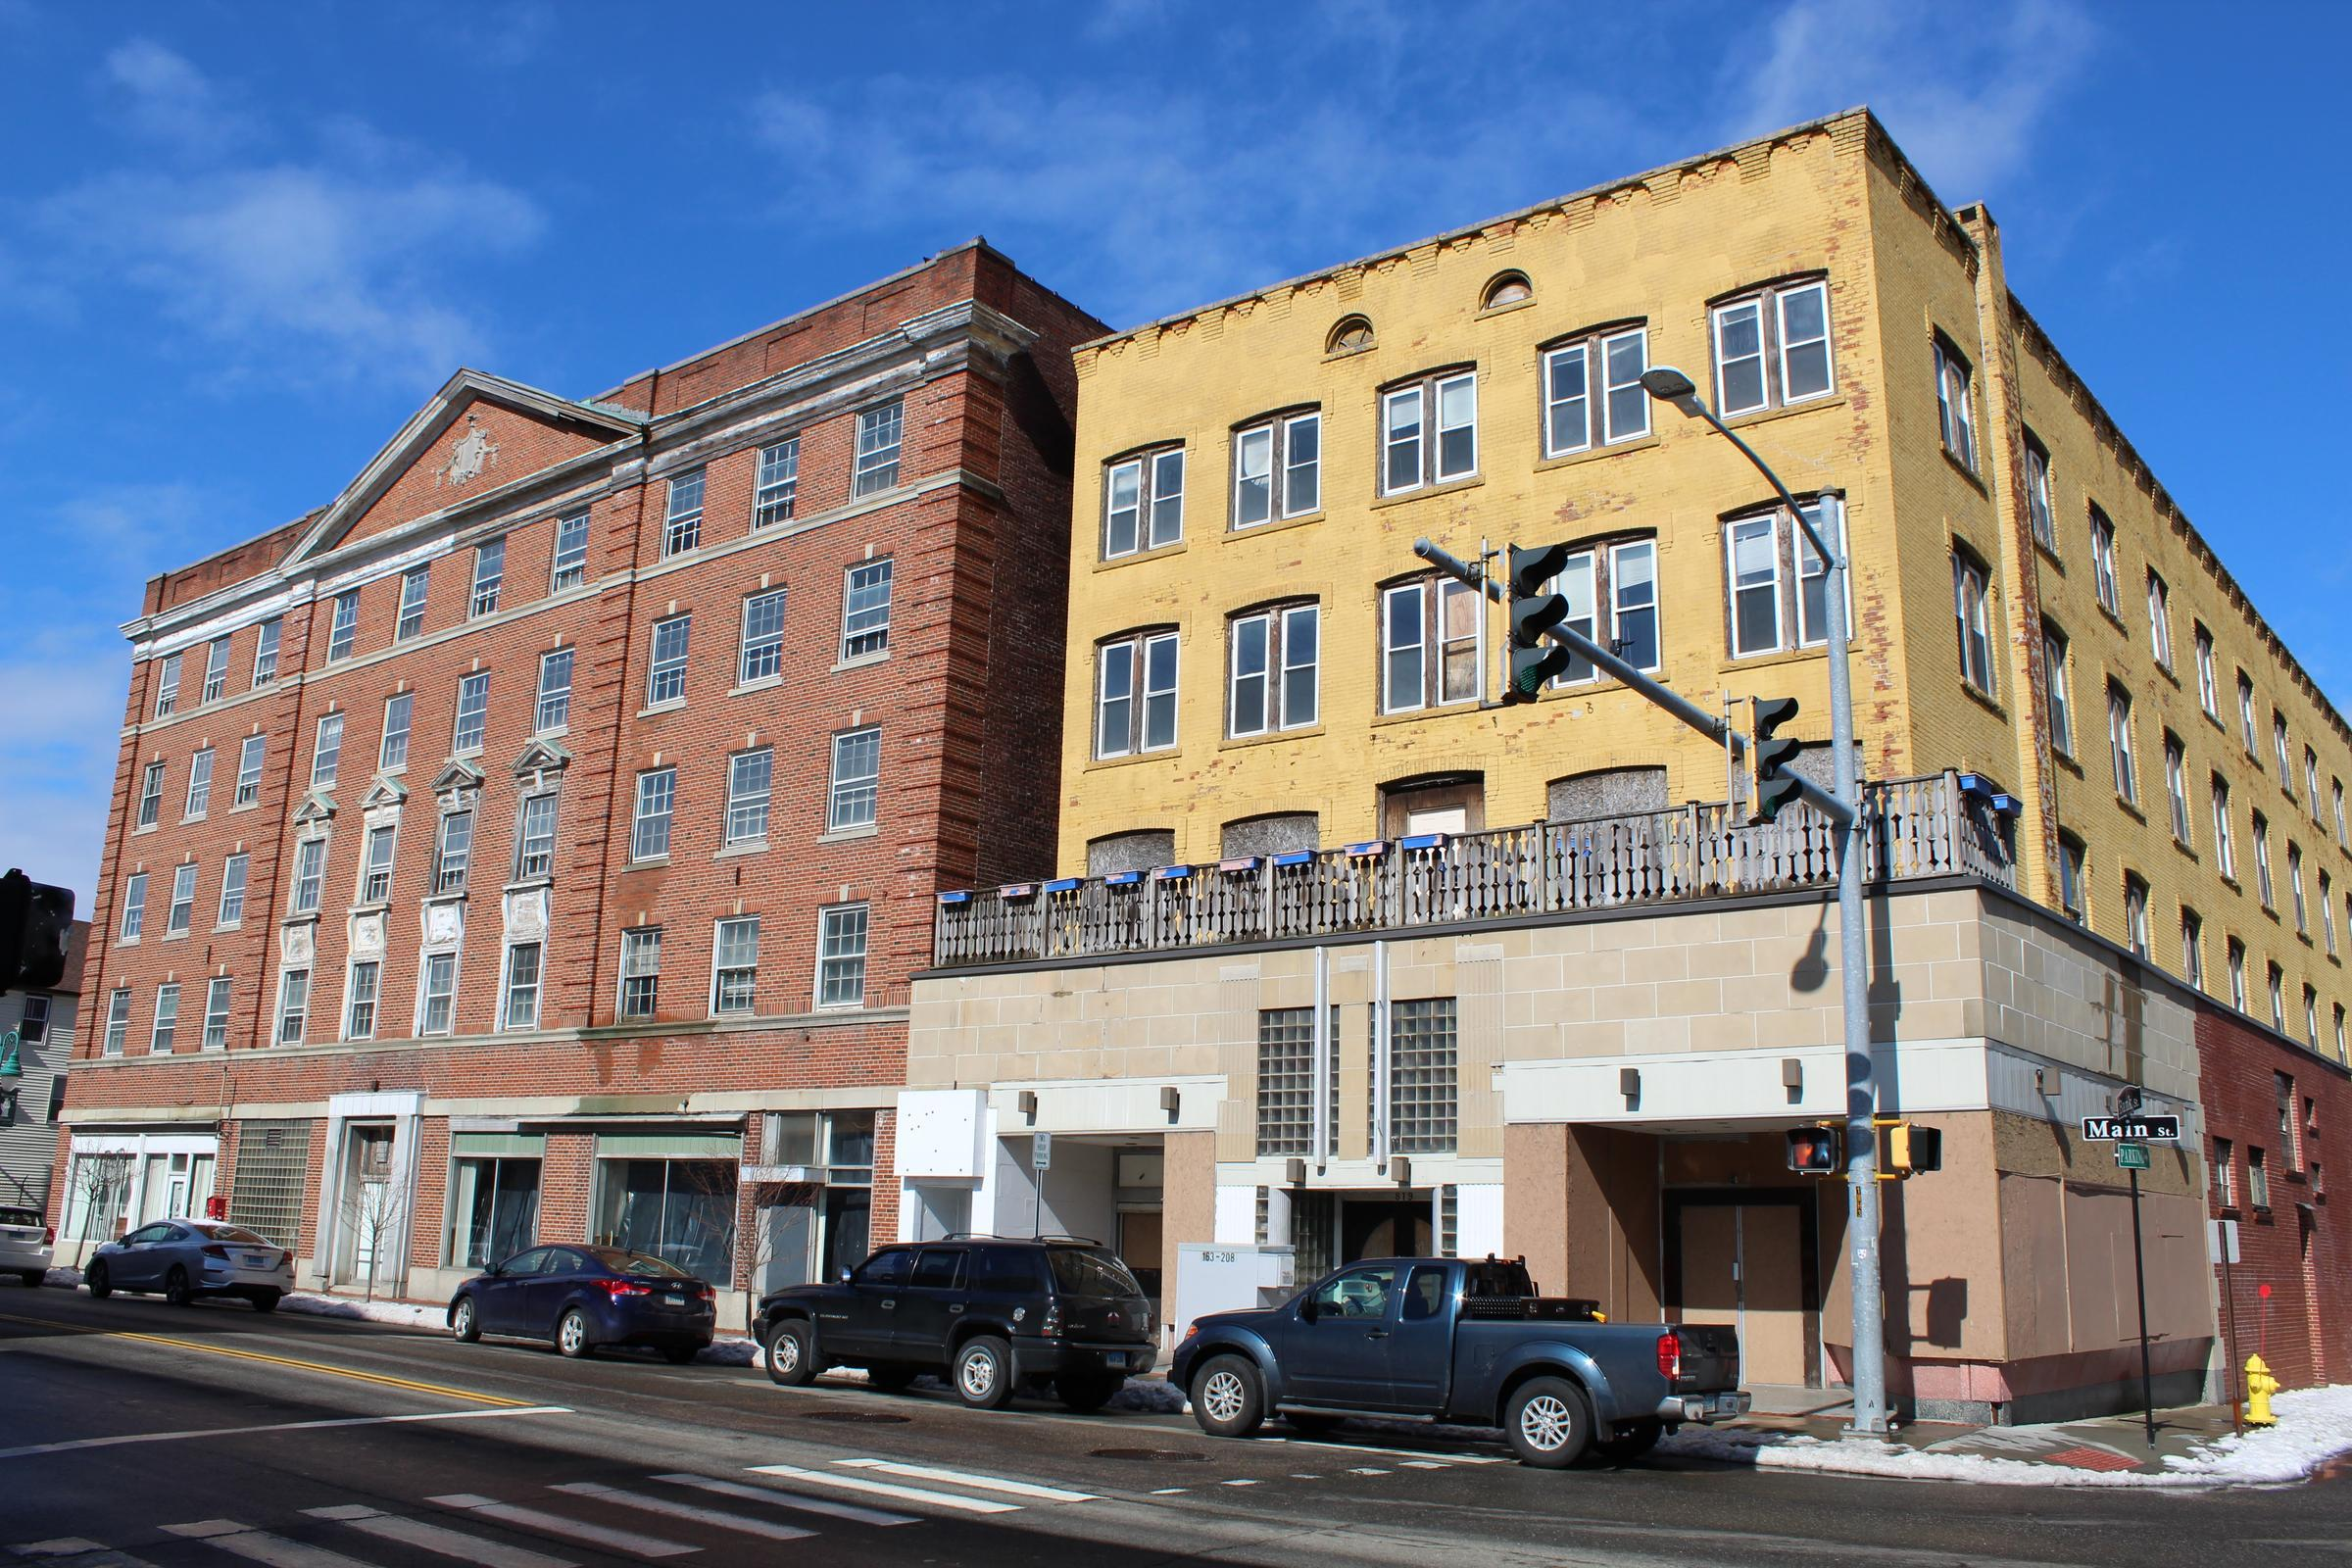 School Resource Officers, Casino Talks, And Willimantic Compromises Over Historic Hotels